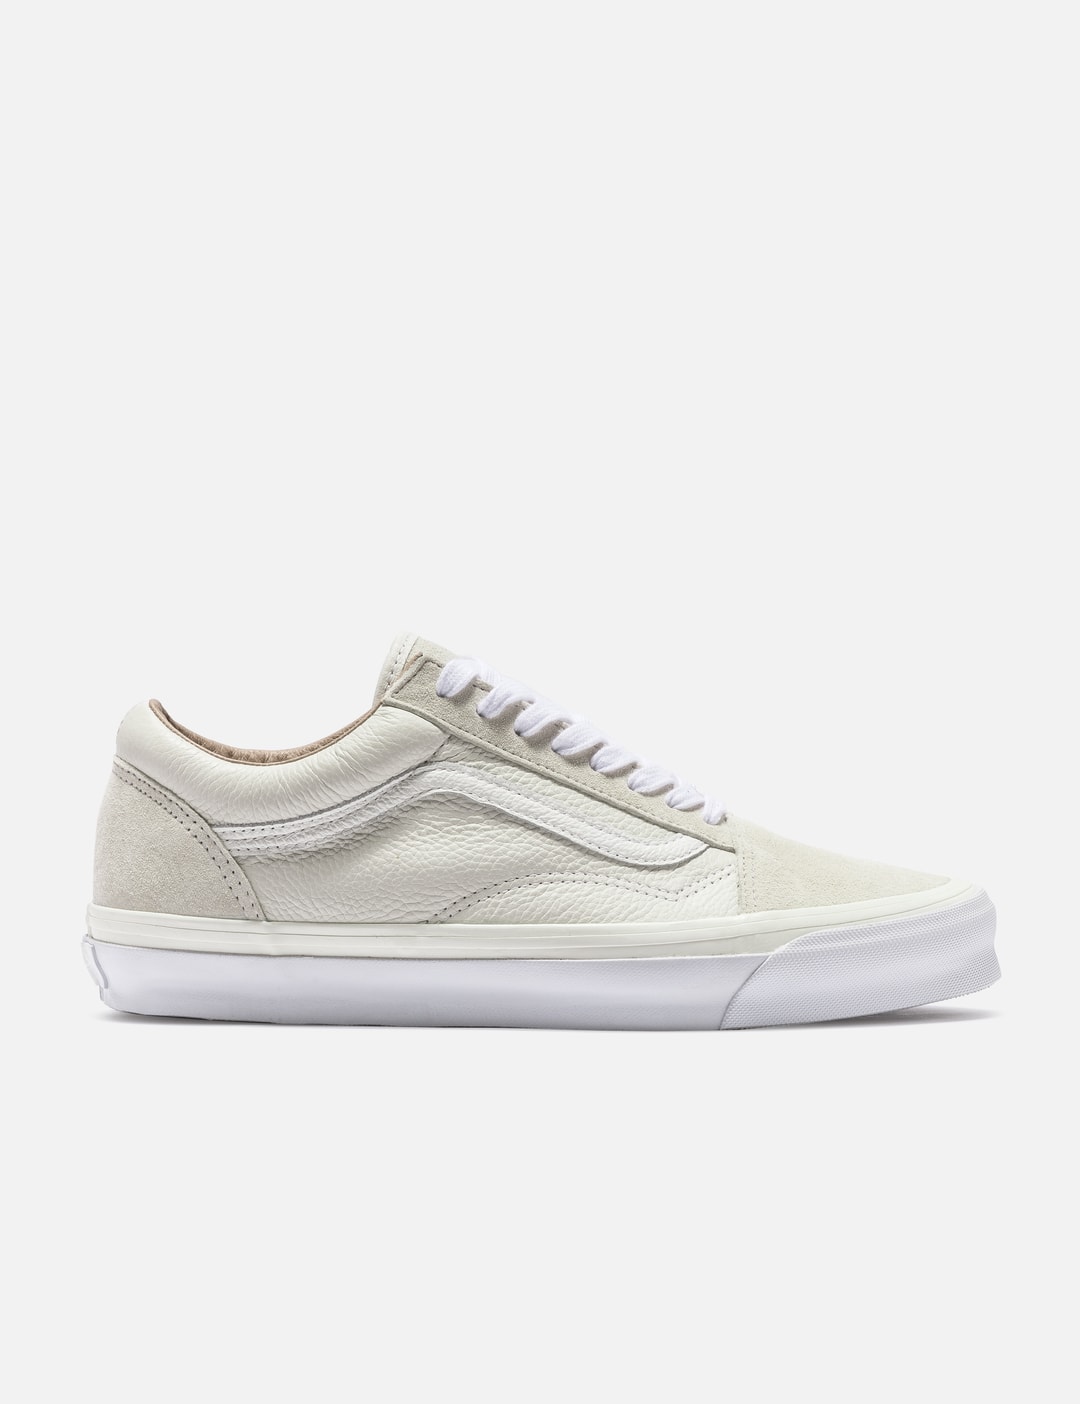 Vans - Old Skool LX | HBX - Globally Curated Fashion and Lifestyle by ...